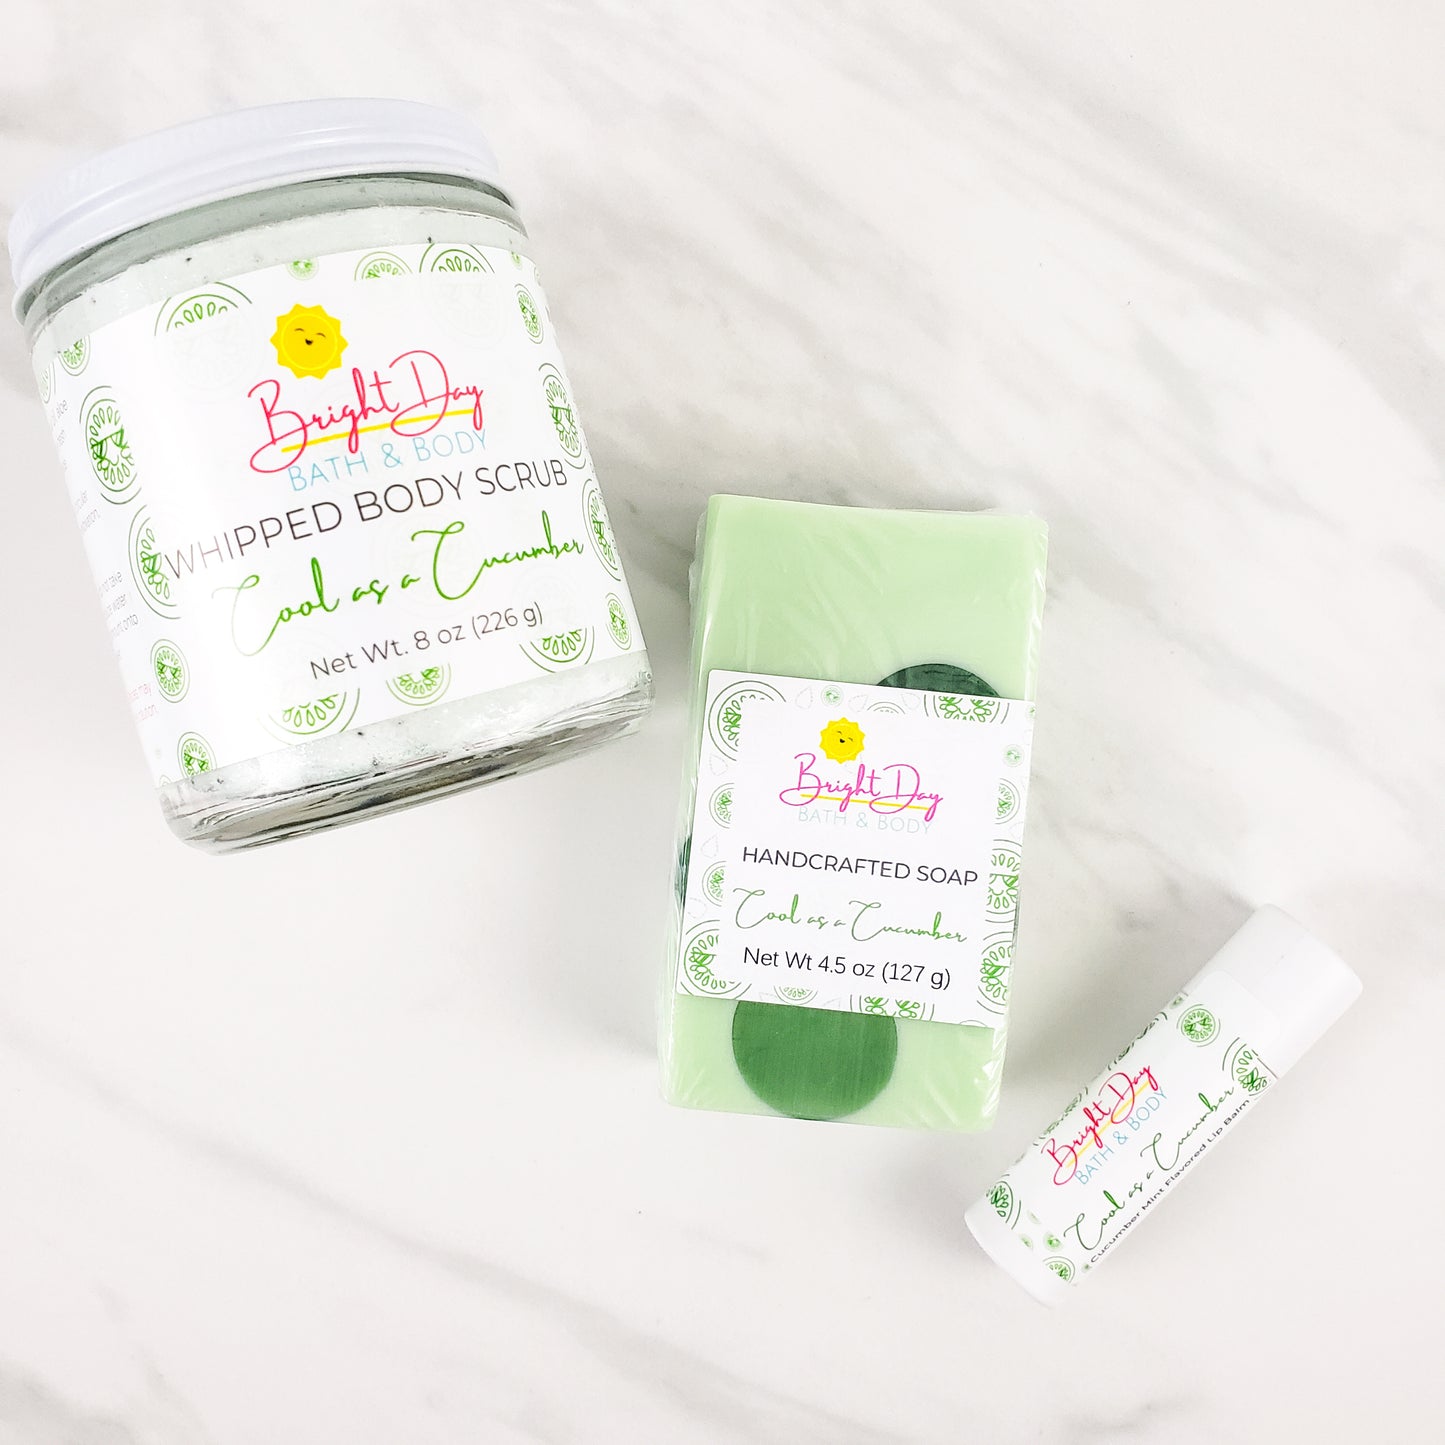 A Cool as a Cucumber body scrub, soap bar and lip balm on a marble background